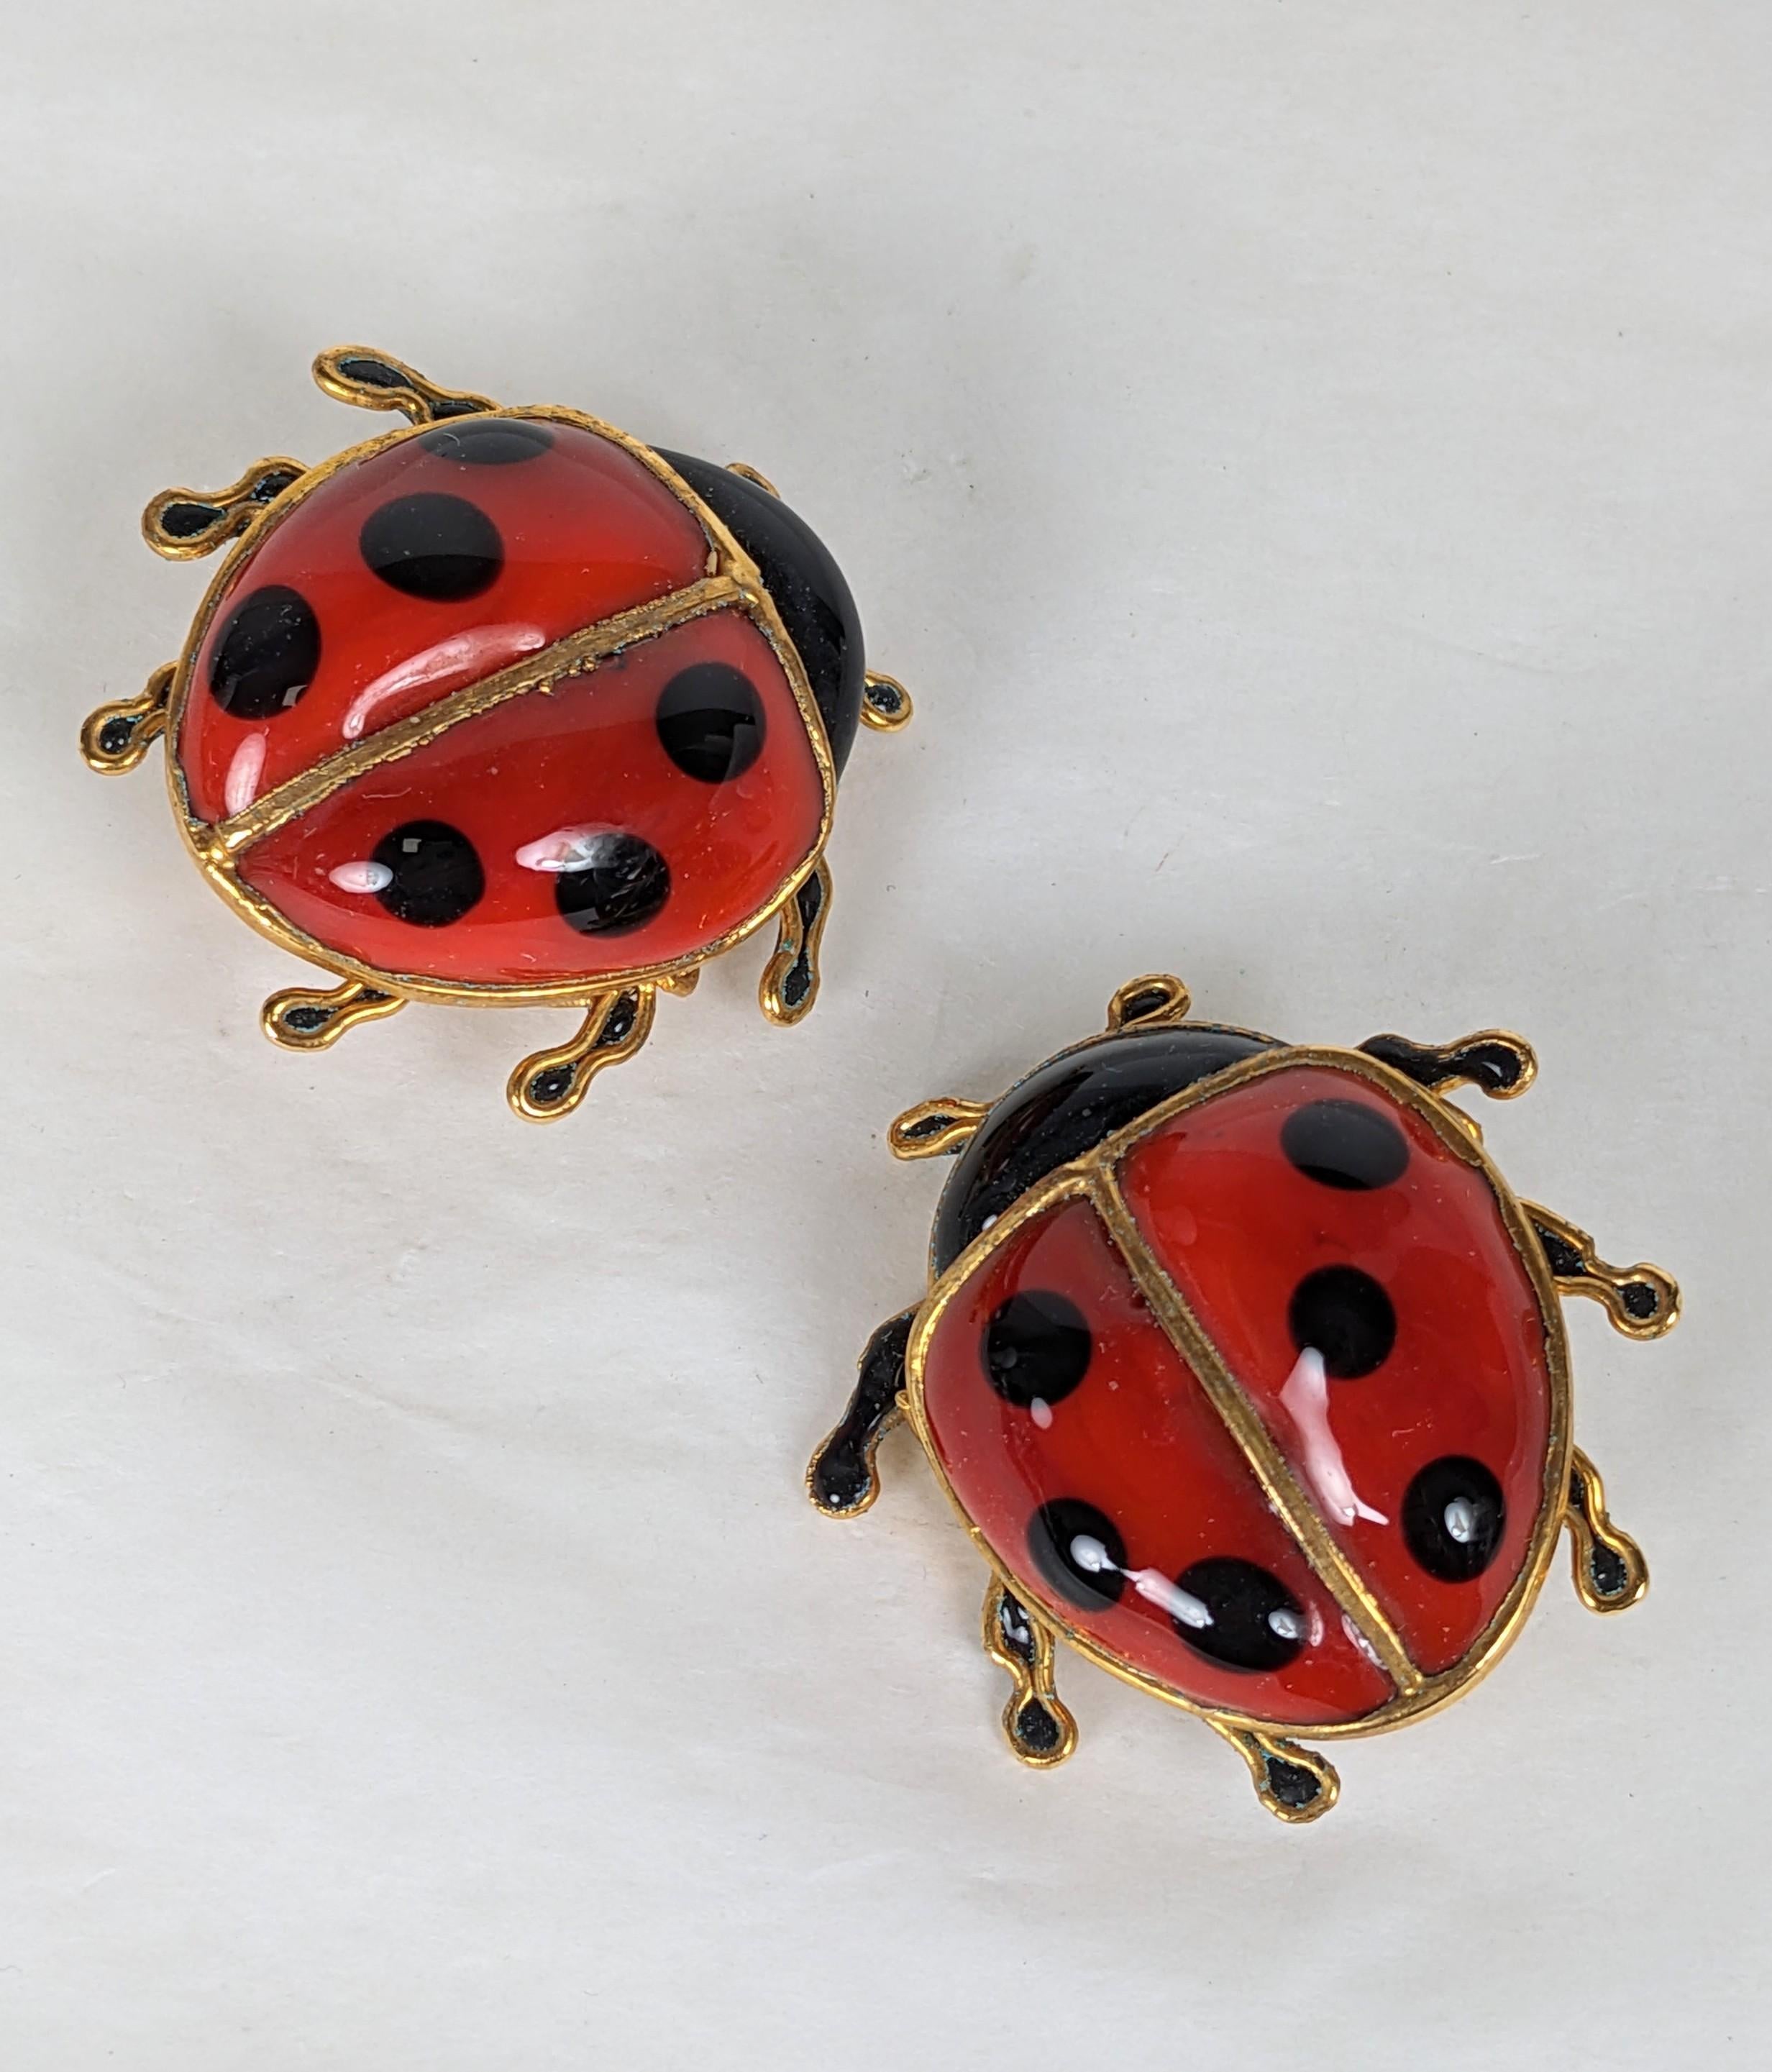 Unusual Surrealist Maison Gripoix Lady Bug Earrings from the 1980's likely for Dominique Aurientis. These are unsigned but we have handled lady bug motifs of hers before. 
Beautifully hand crafted in red and black poured glass in gilt bronze with